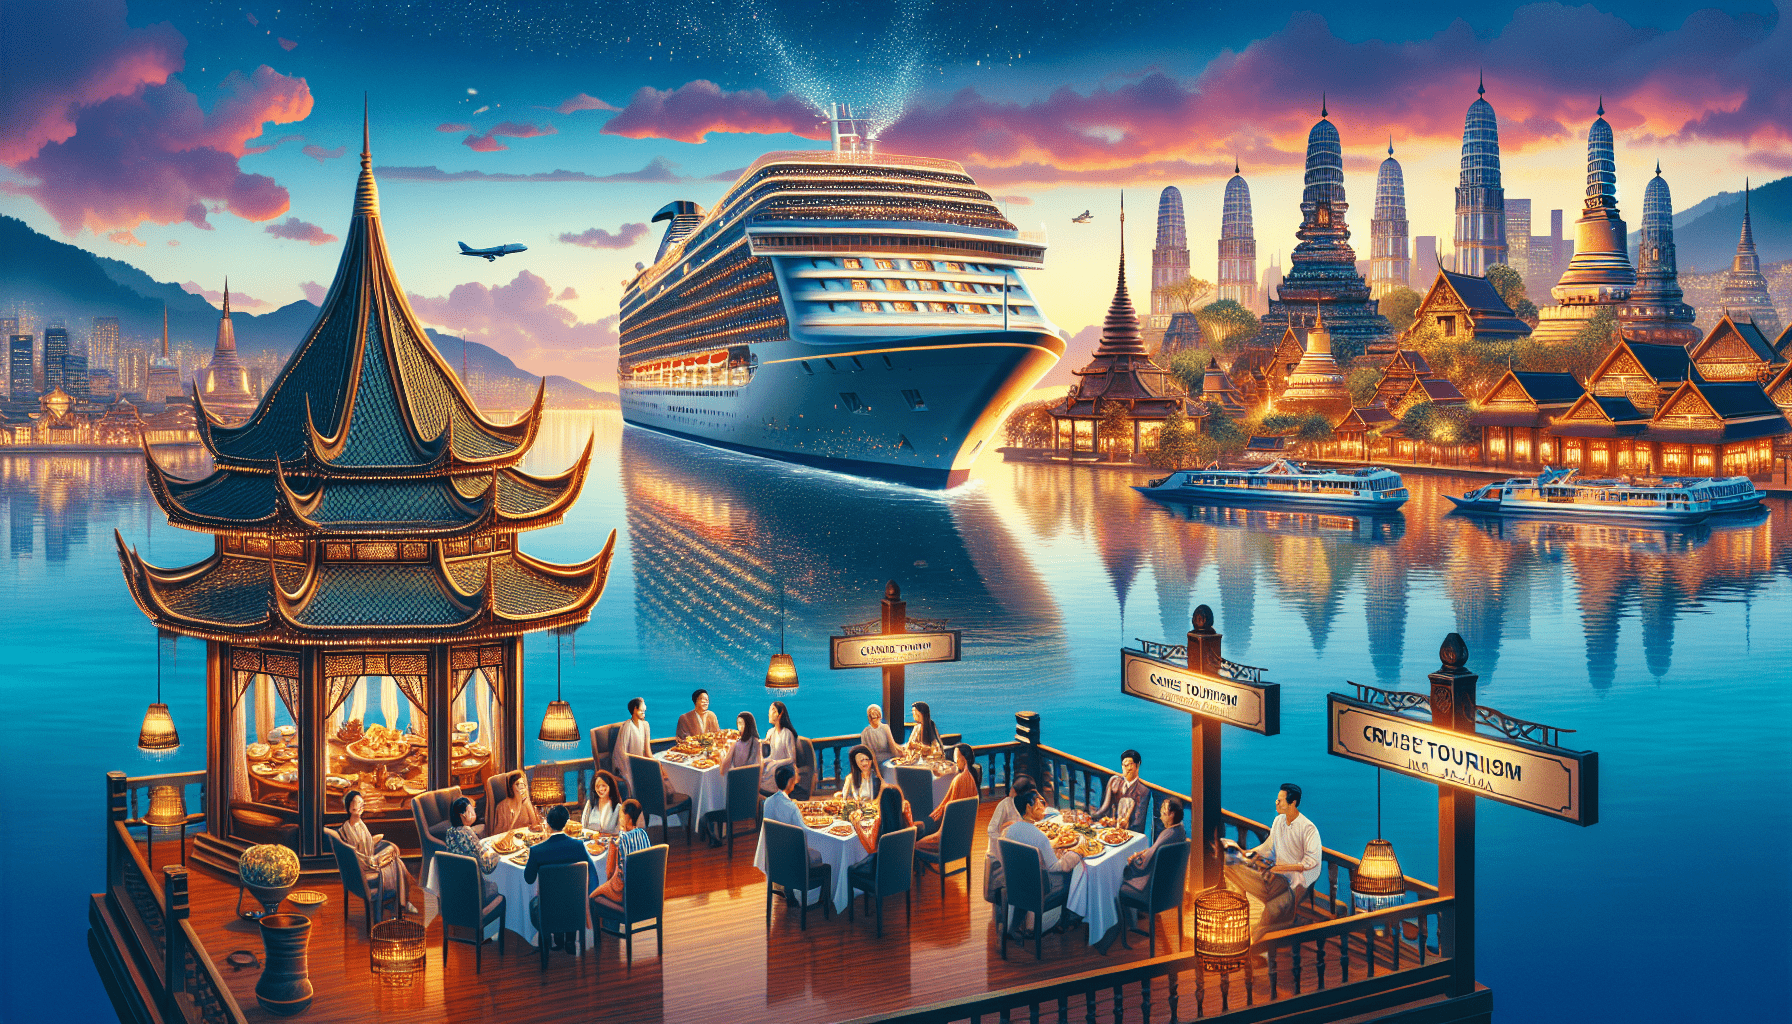 What Makes Asia An Interesting Market For Cruise Tourism?